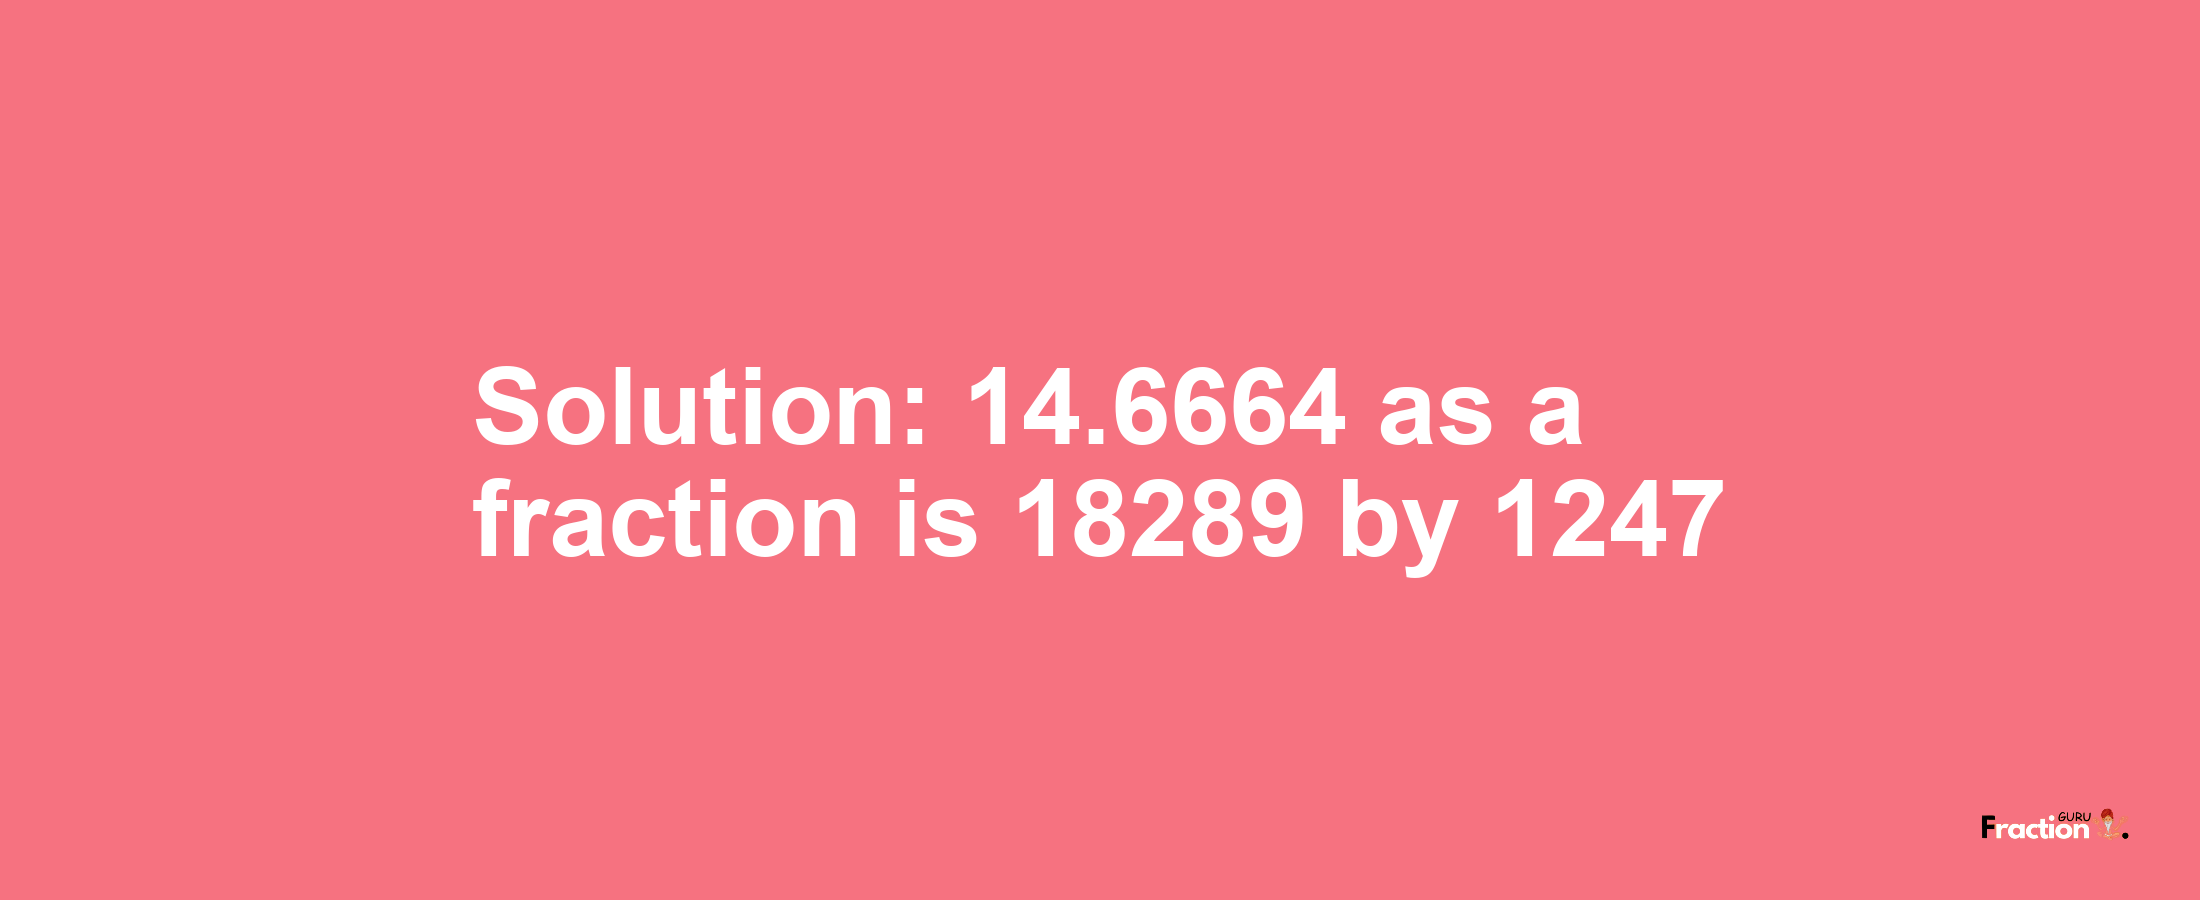 Solution:14.6664 as a fraction is 18289/1247